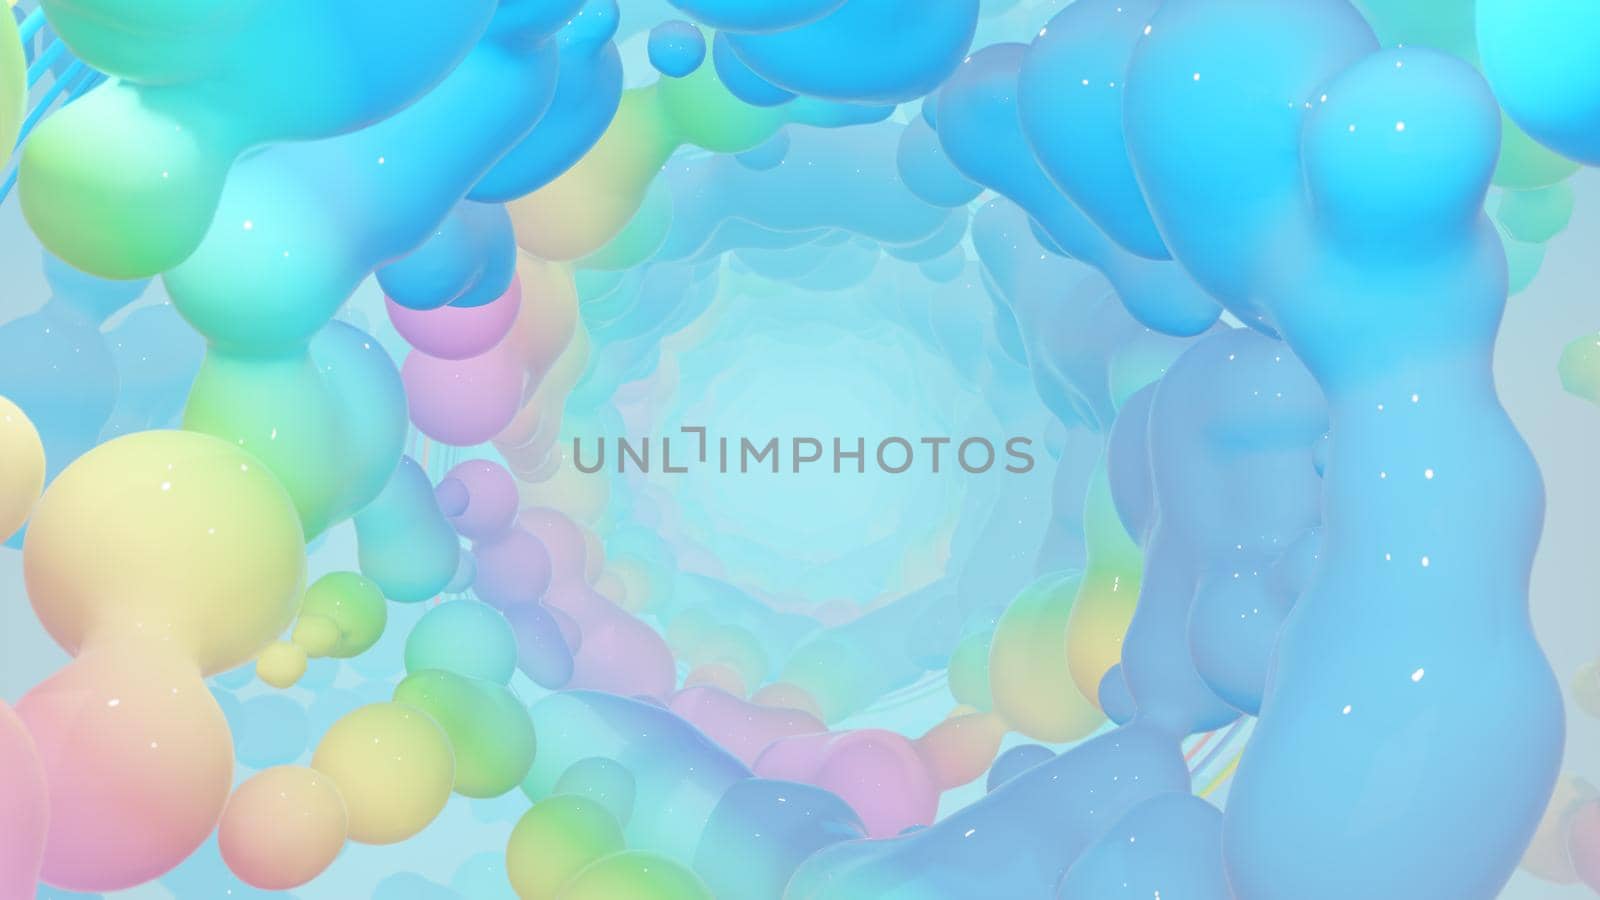 Abstract Holographic Geometry With Radial Circles by urzine